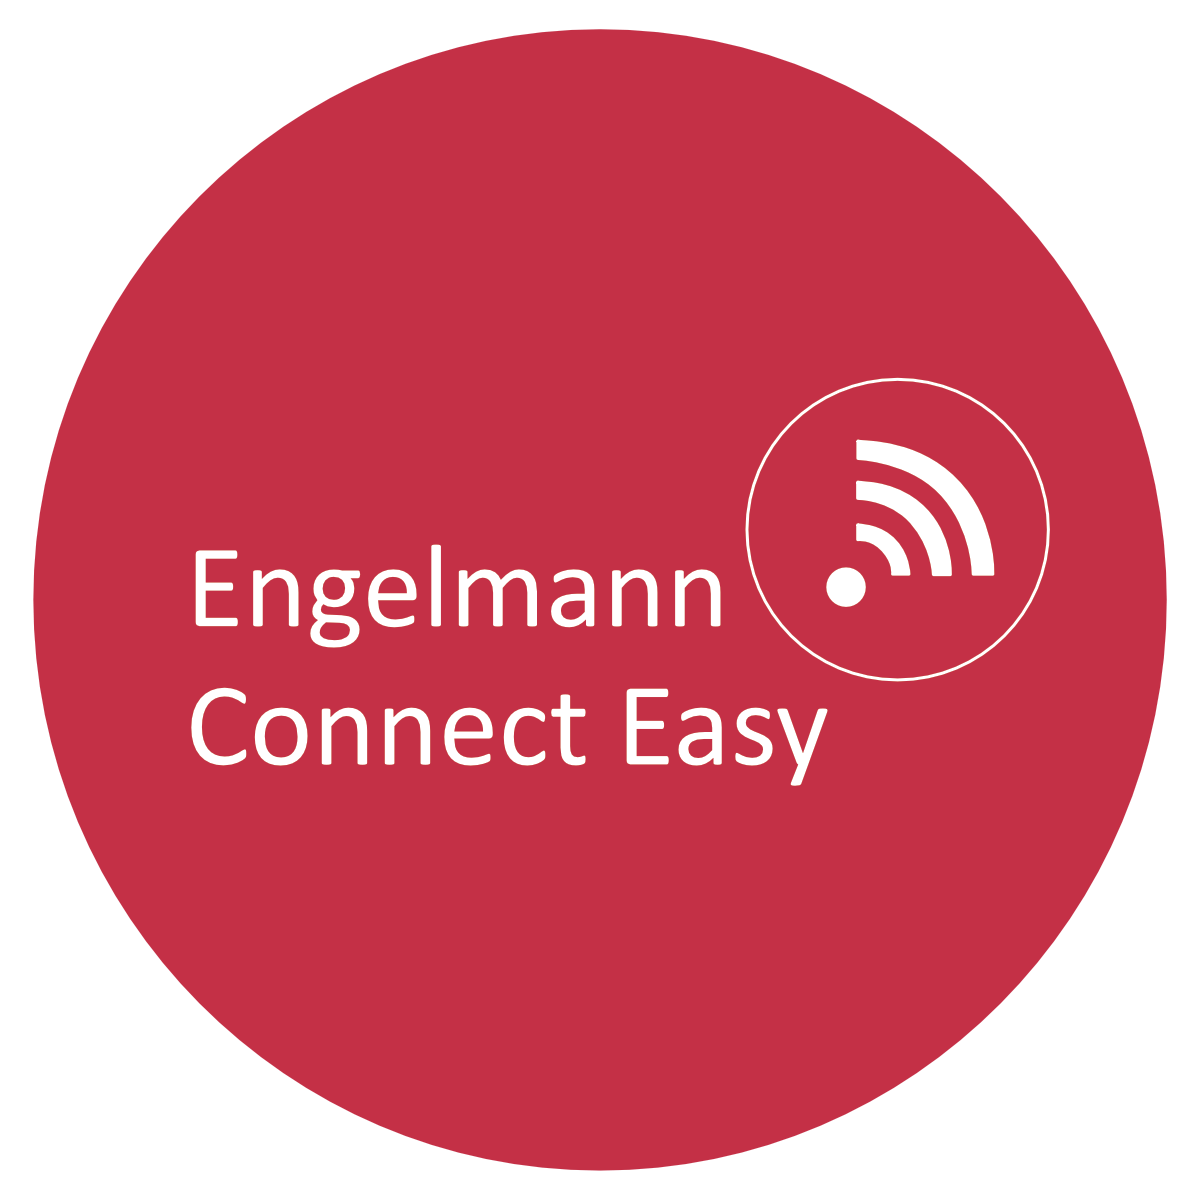 Connect Easy